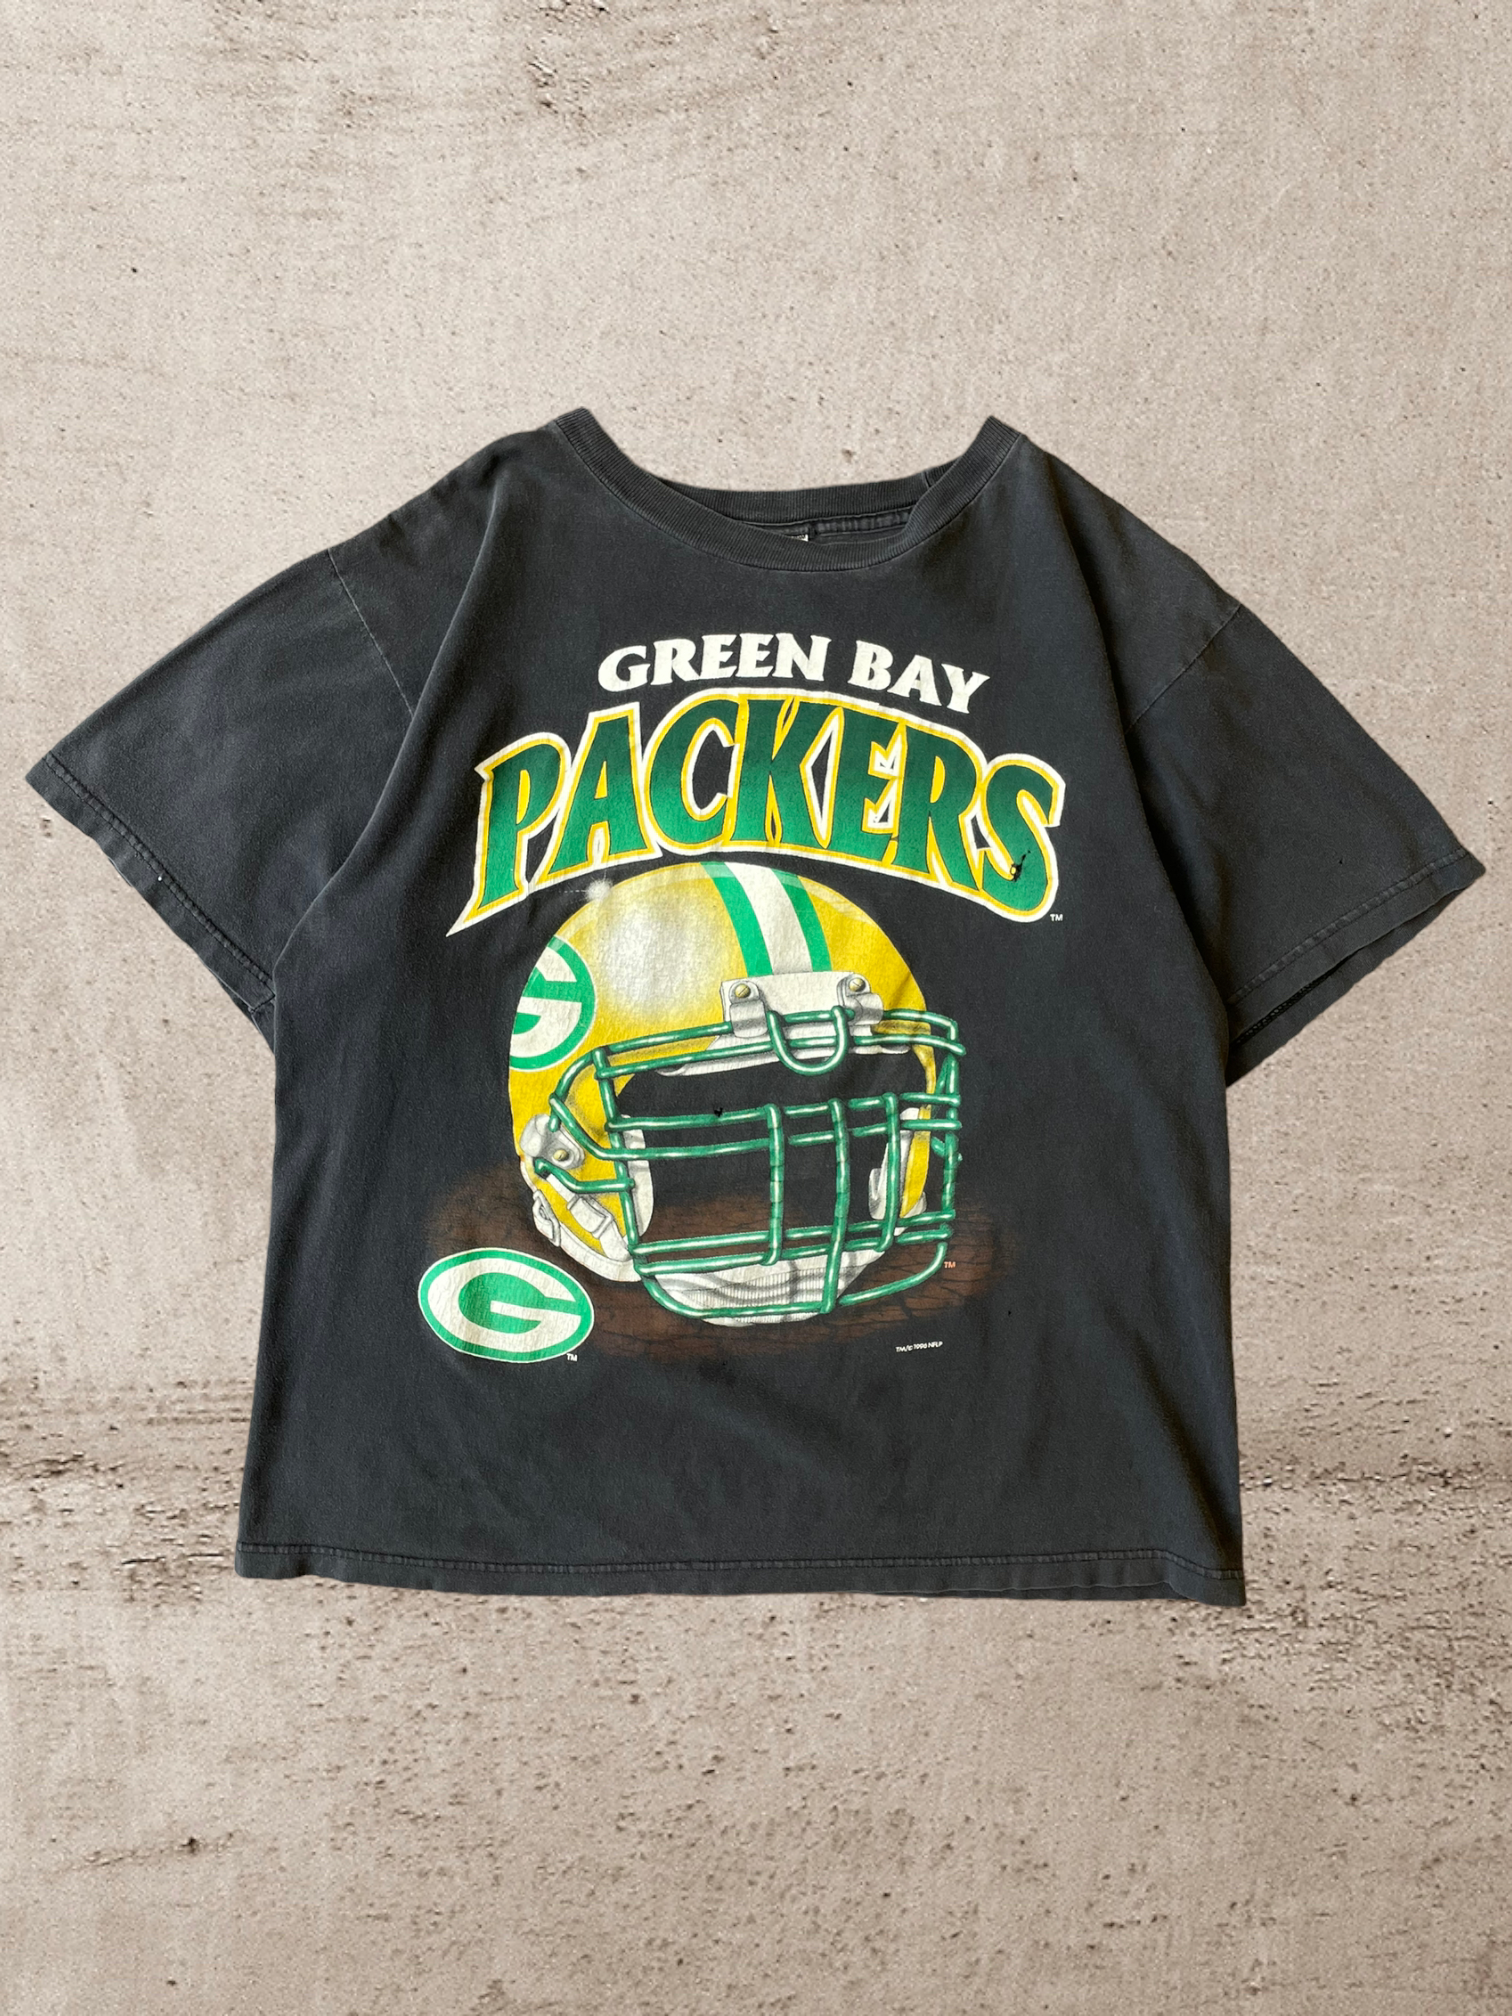 90s Green Bay Packers T-Shirt - Large